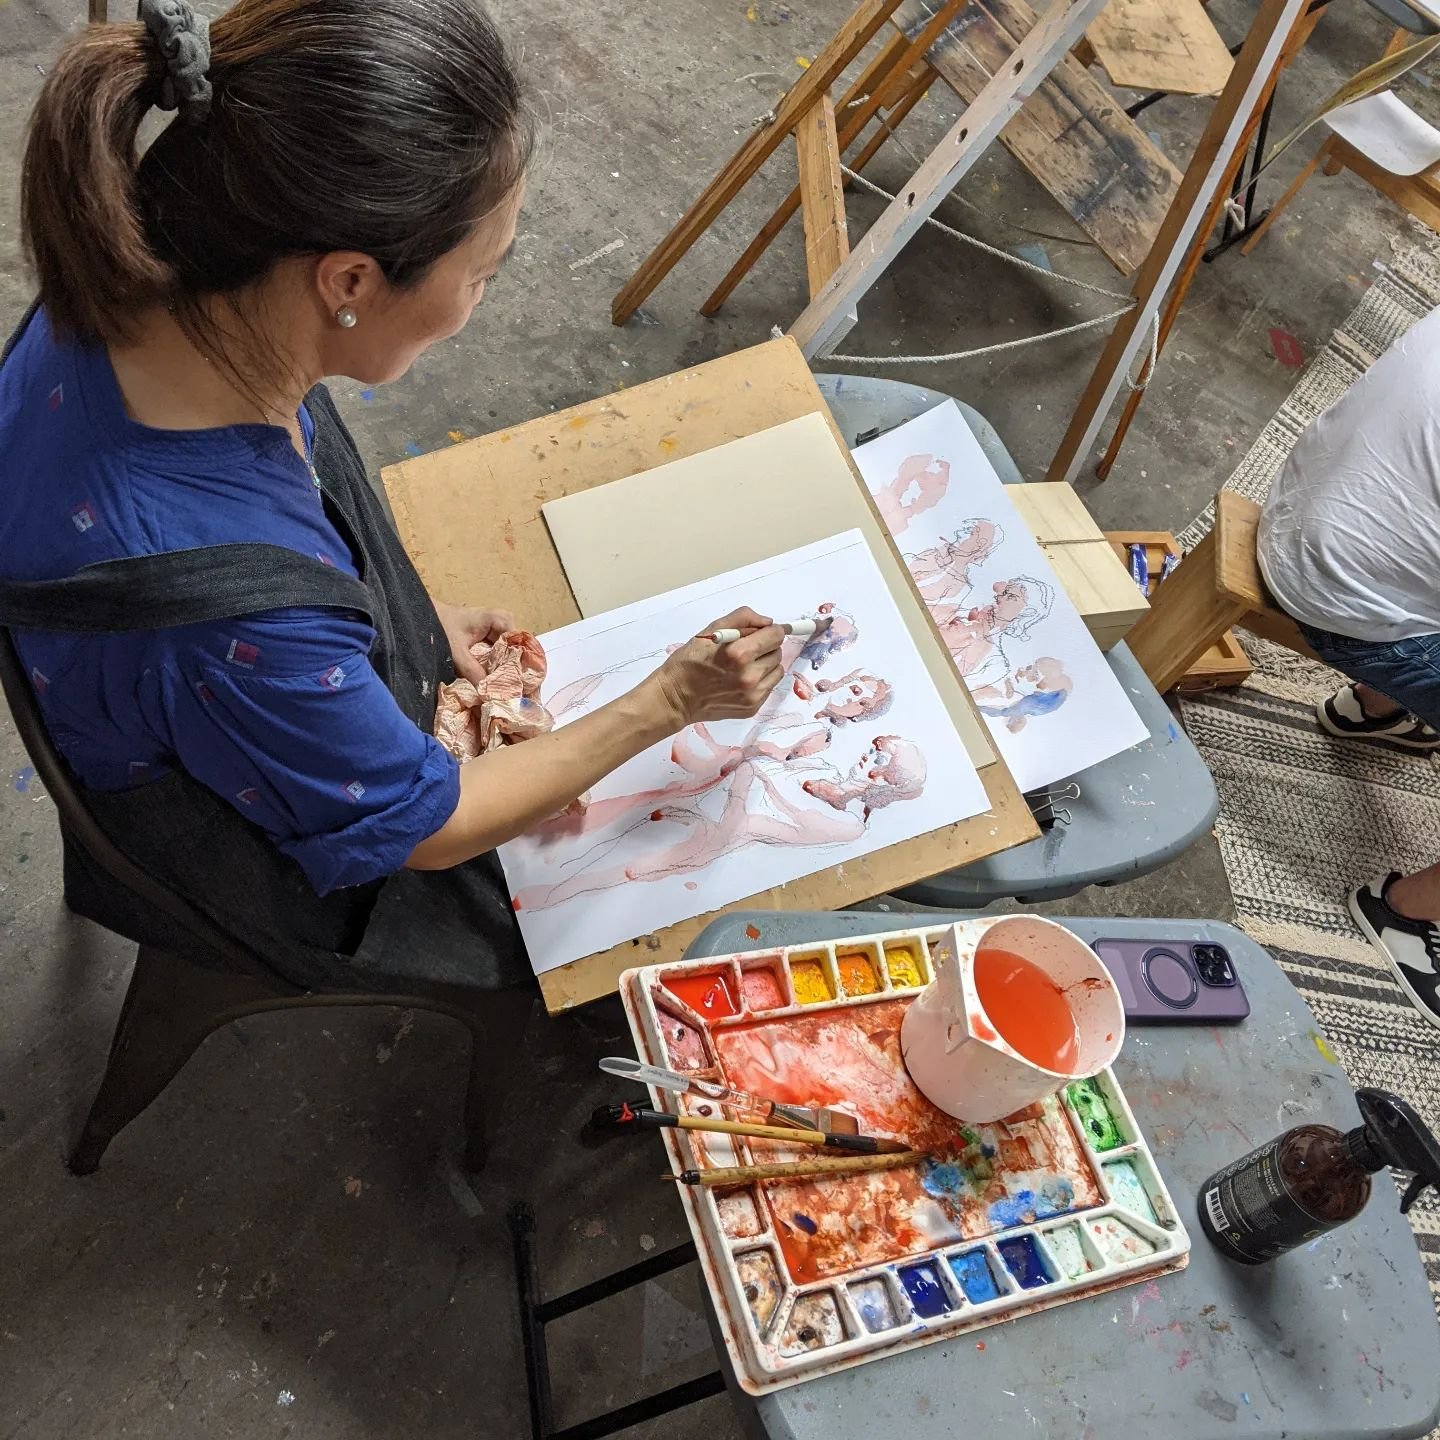 Long weekend! Long Pose! Got a spare Saturday afternoon for creative force (May the 4th be with you)?

🗓️ This Saturday 4th May is with the lovely model Georgie of @brisbane_artist_models 

➡️ 1:30pm - 4:30pm

➡️ Please bring your sketchbooks + adva